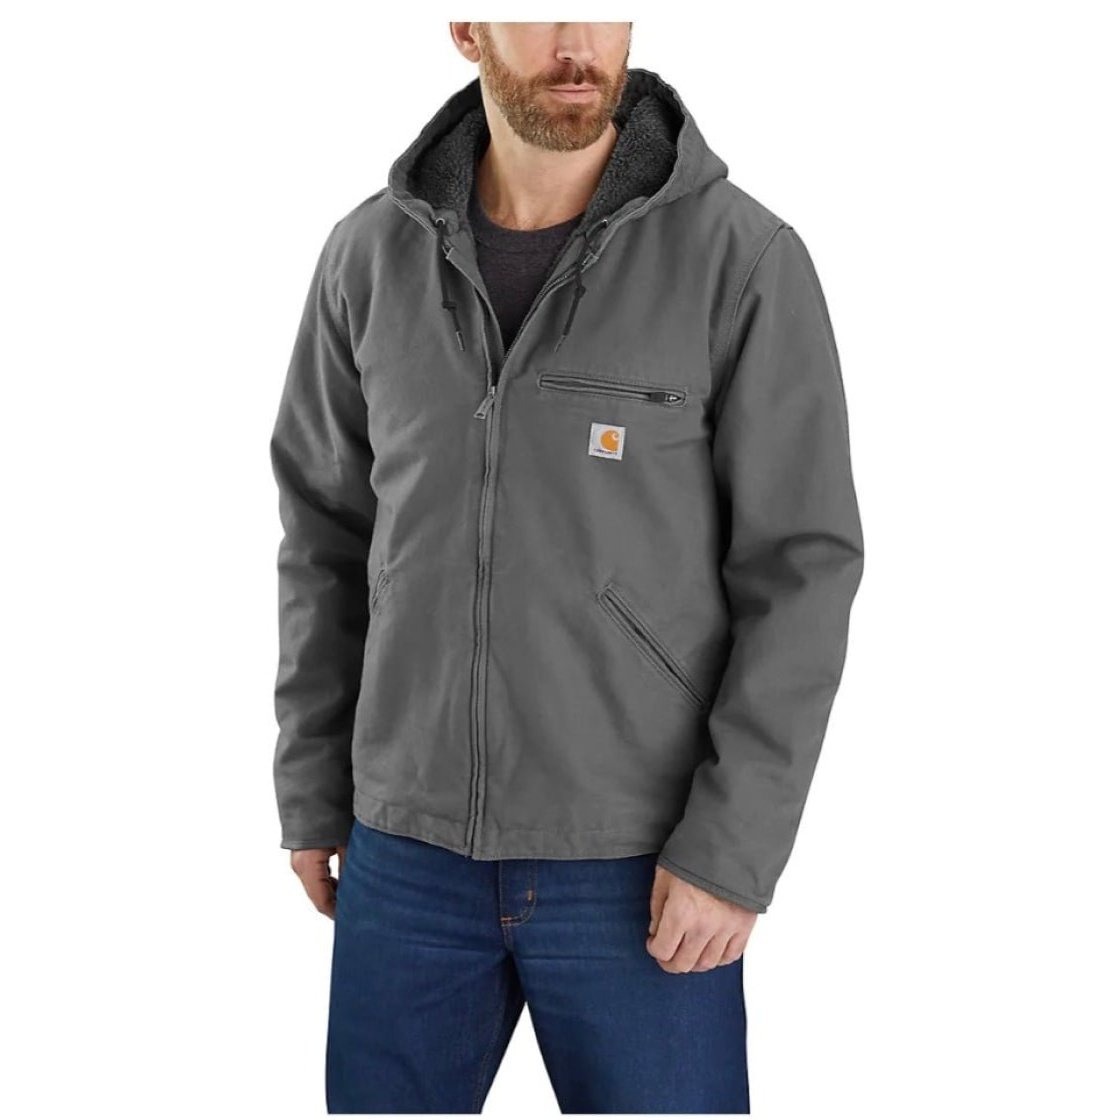 Carhartt Men’s Relaxed Fit Washed Duck Sherpa-Lined Jacket 104392 - Carhartt